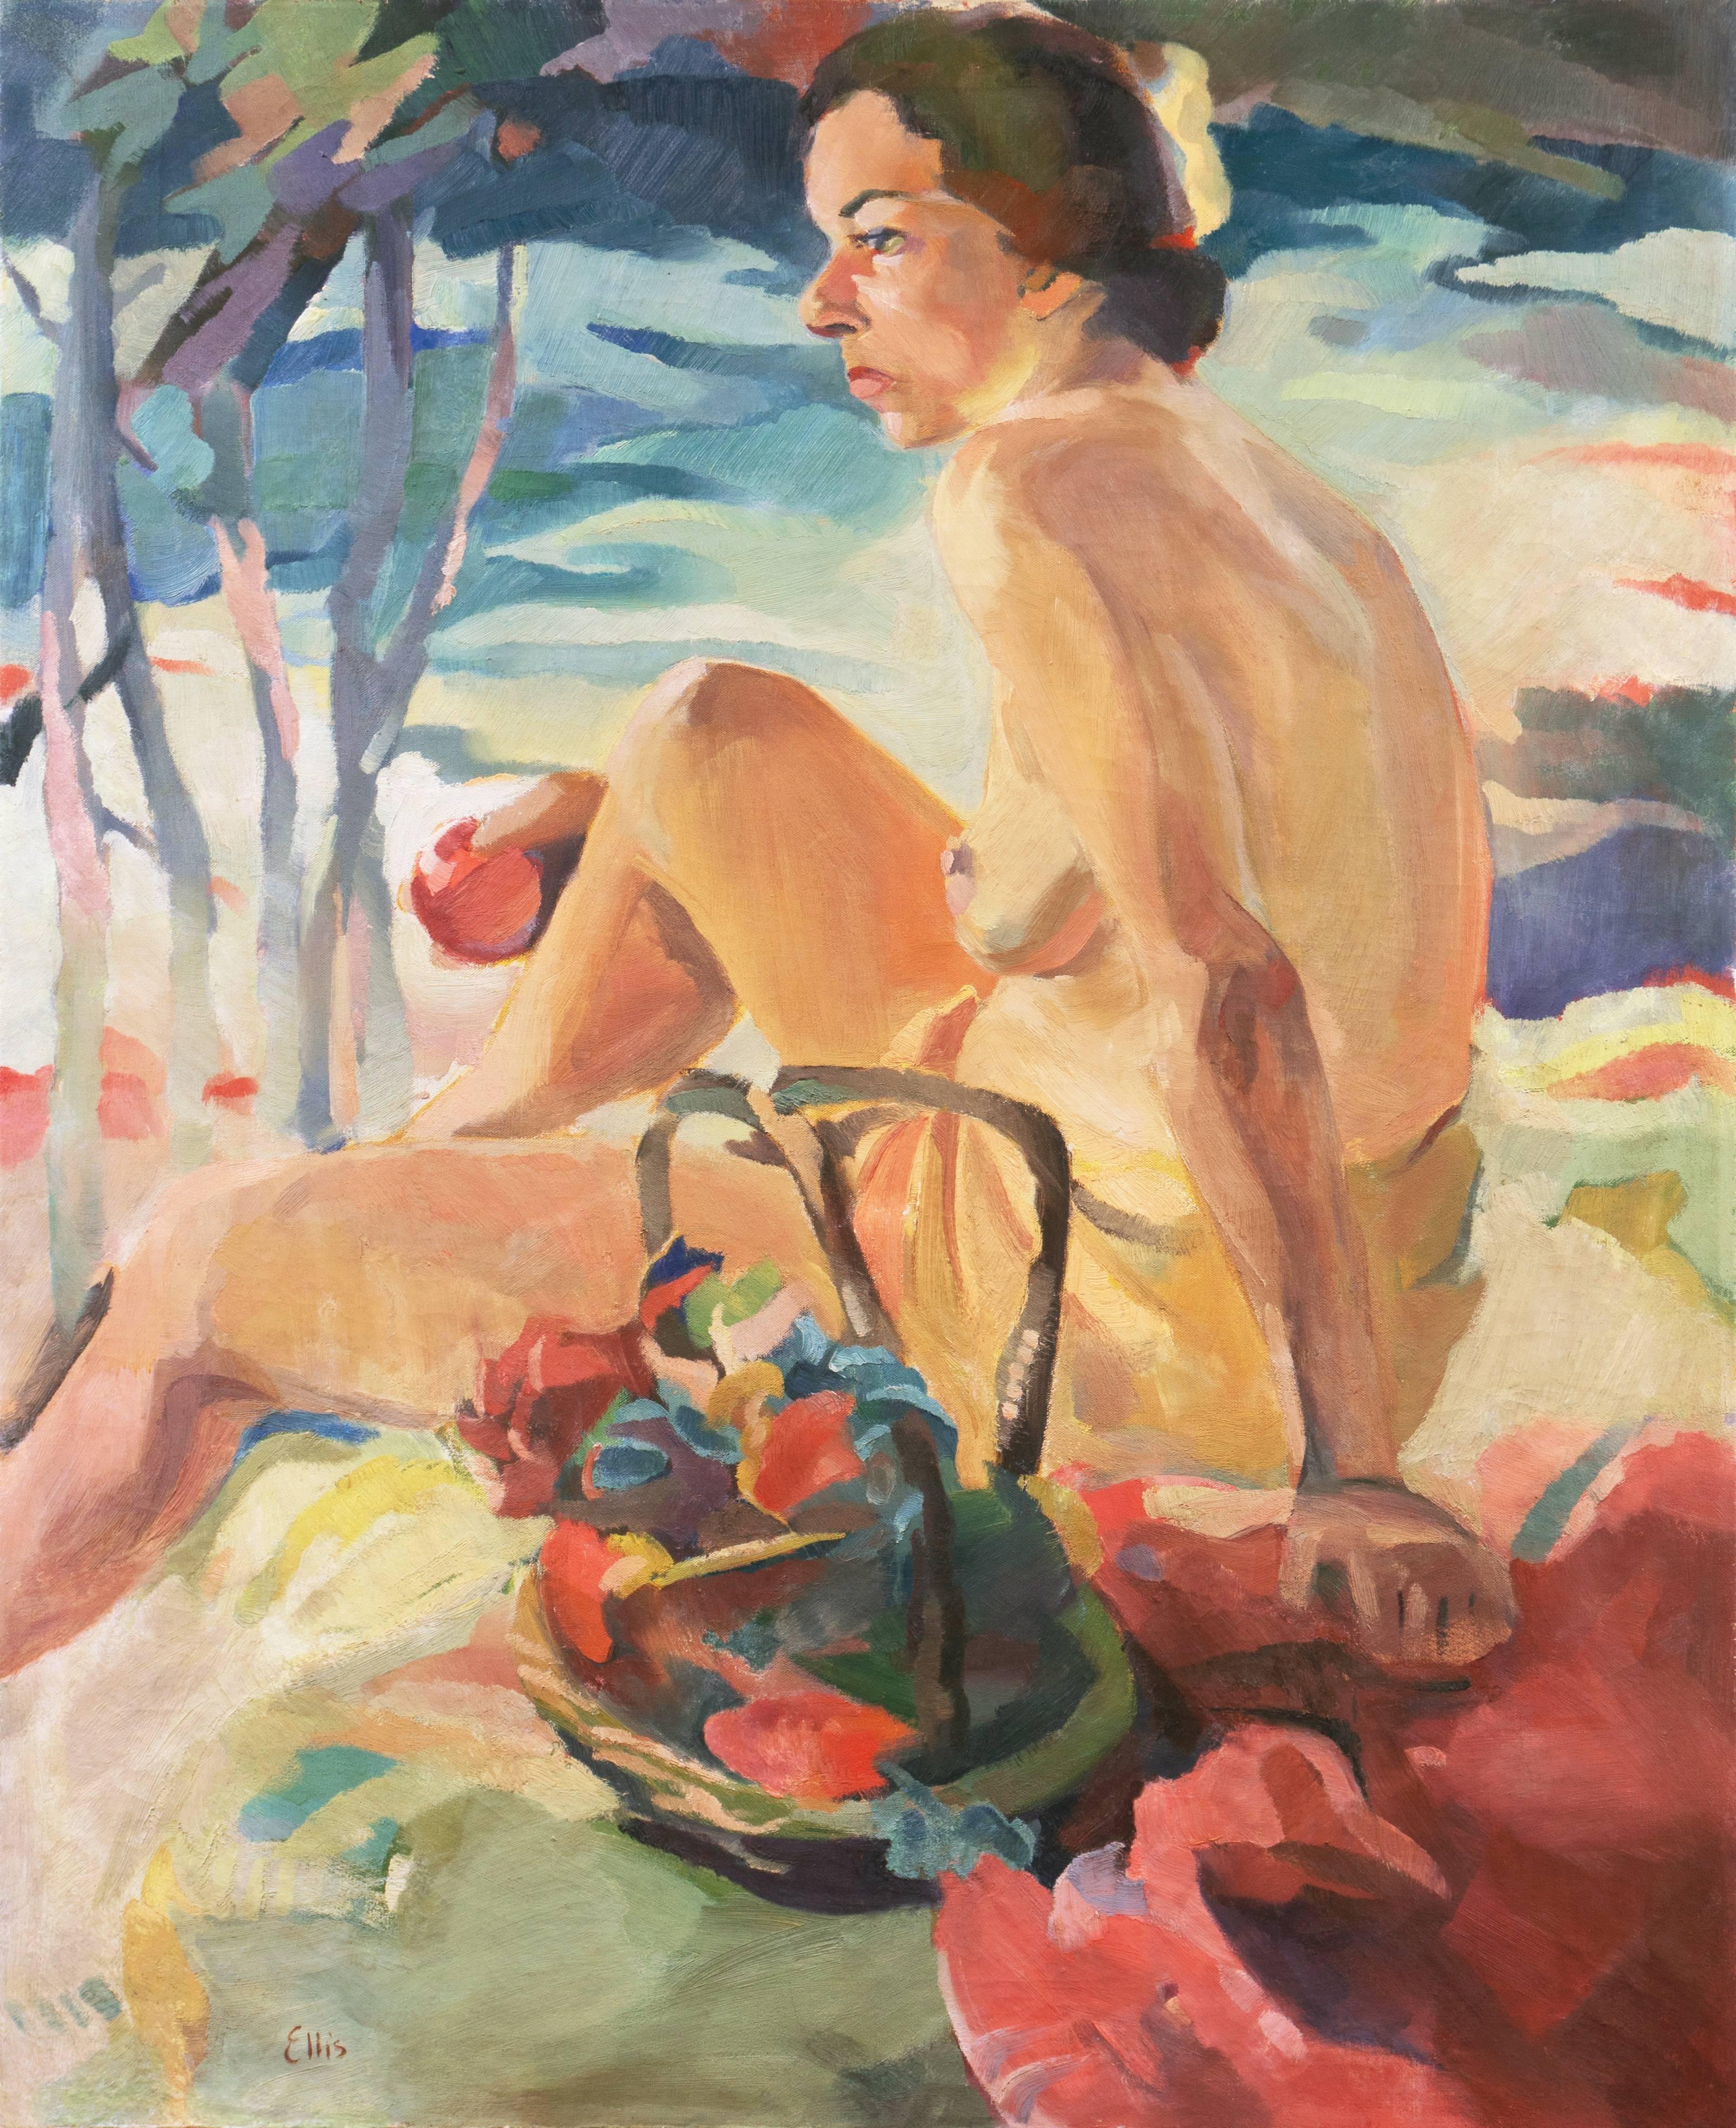 Betty Corson Ellis Nude Painting – 'Nude Seated by a River', Post Impressionist Figural Oil, PAFA, Woman Artist